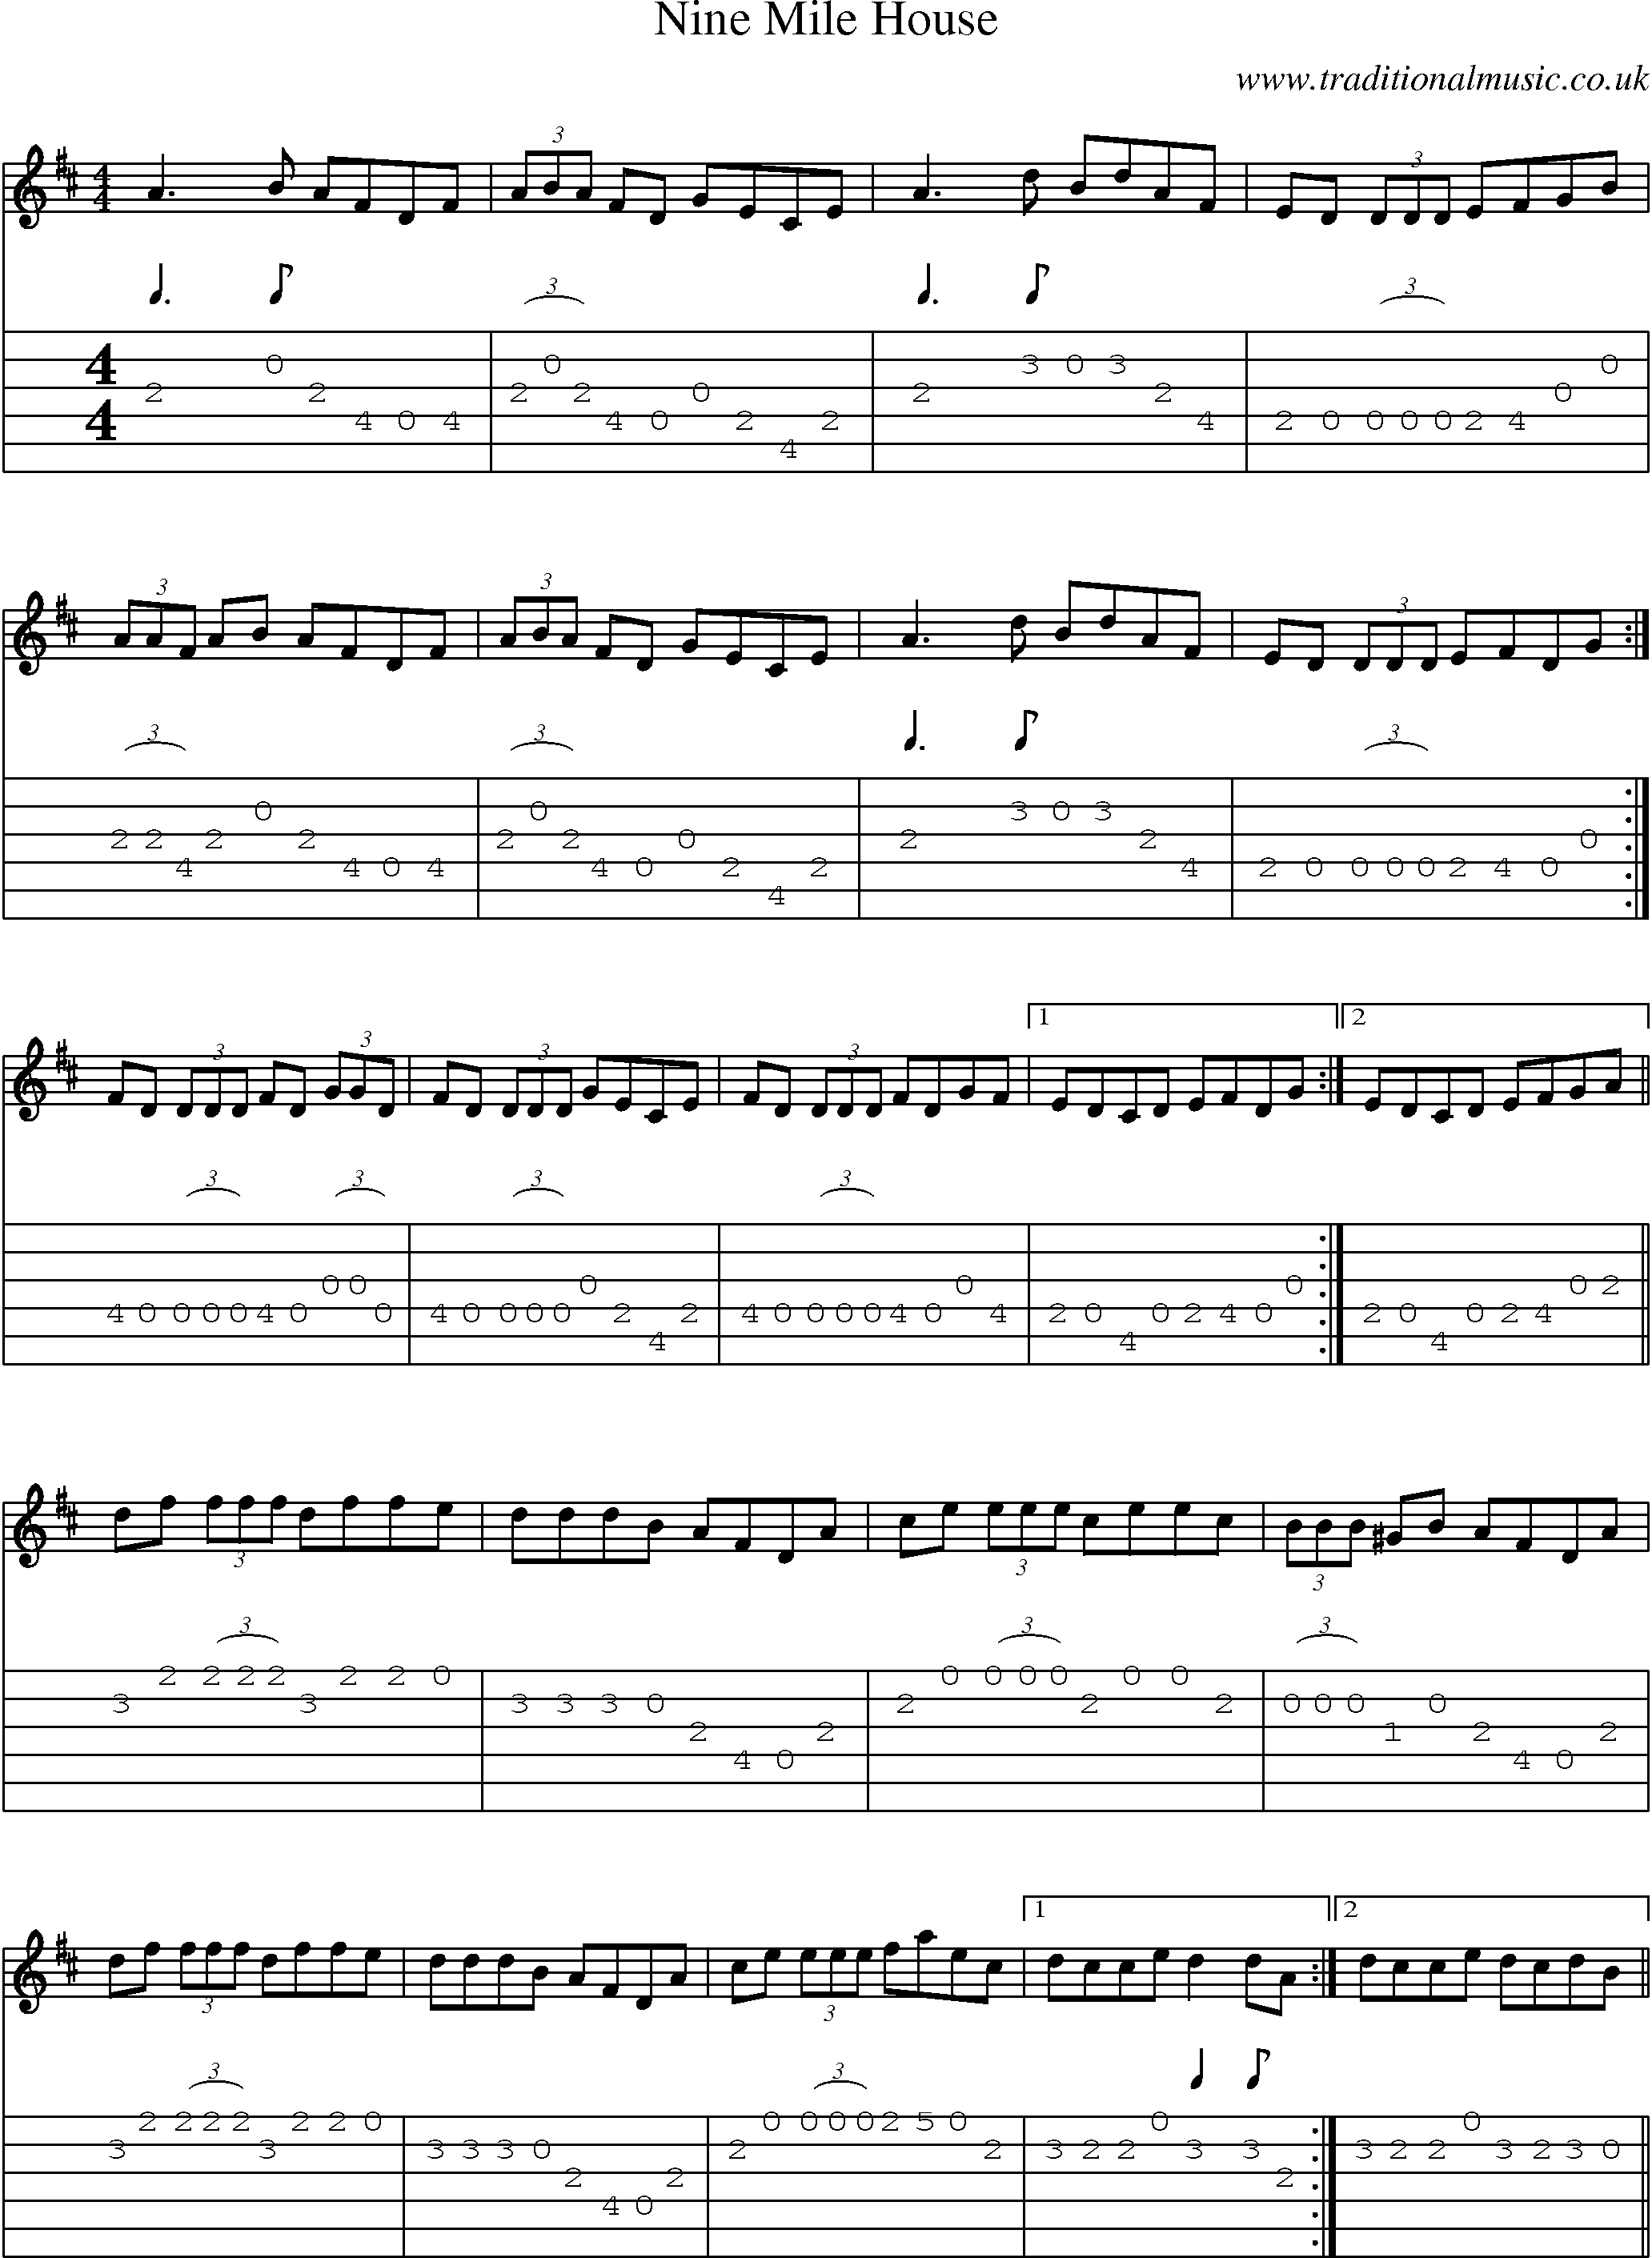 Music Score and Guitar Tabs for Nine Mile House